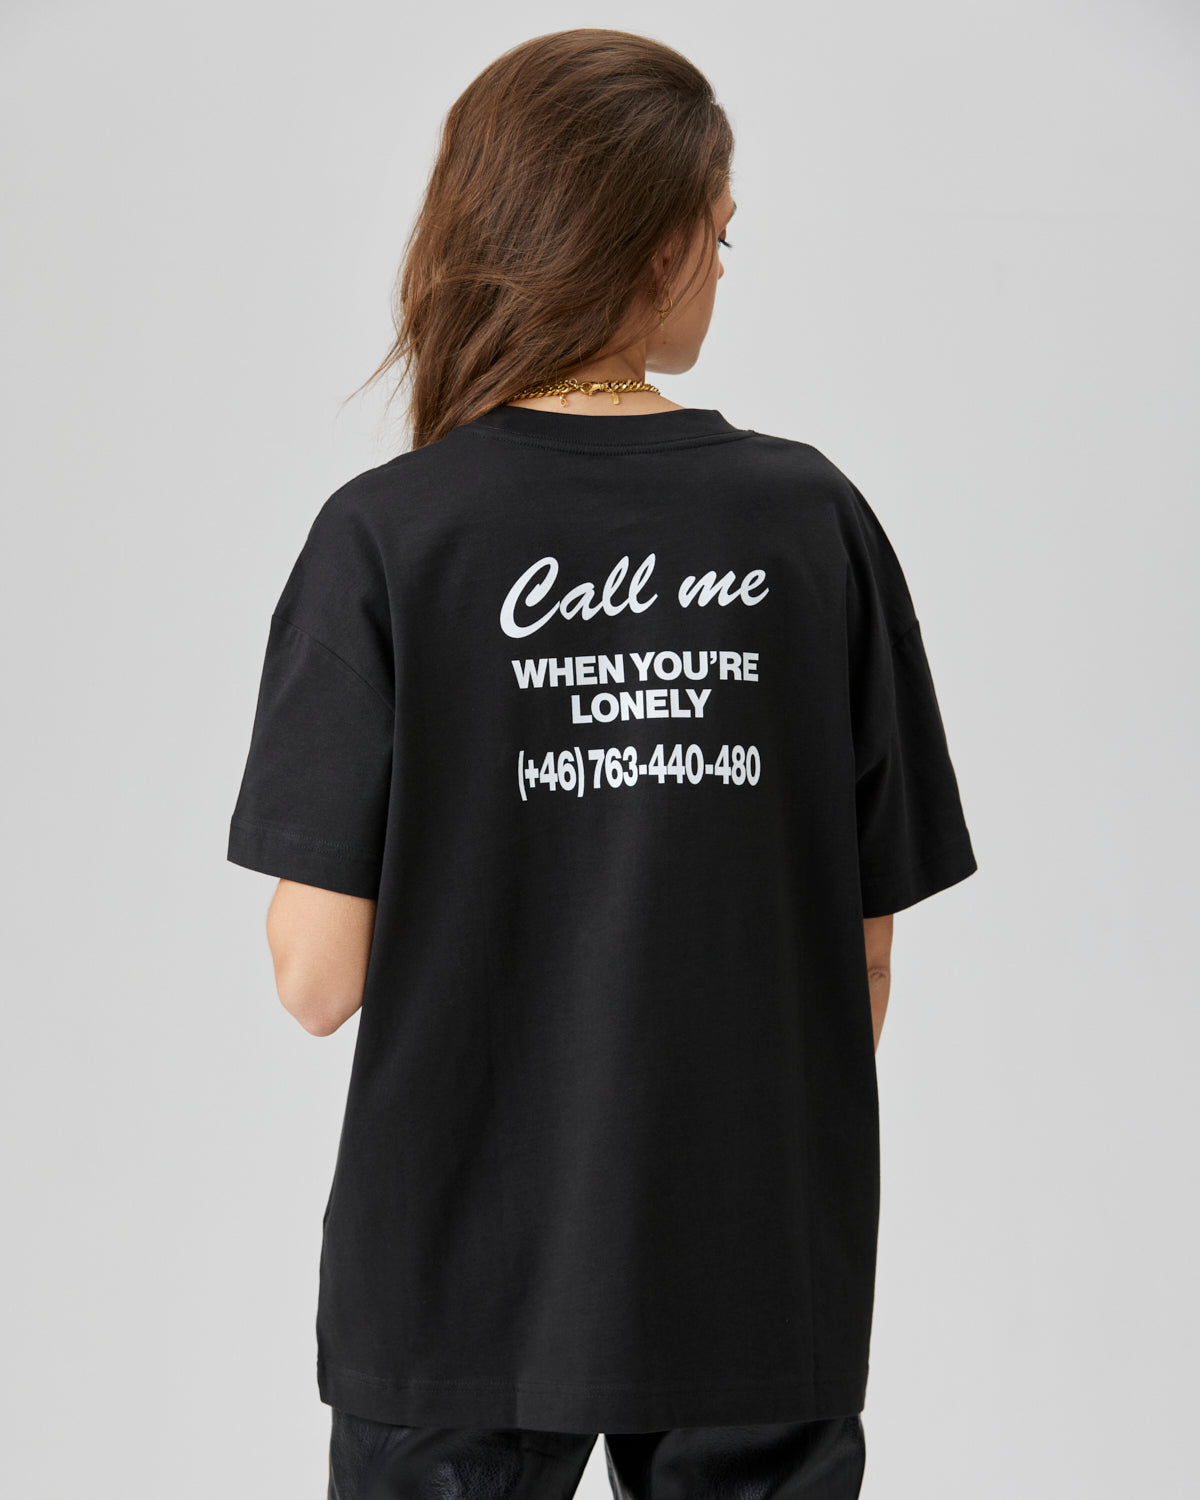 Issue Me Call T-shirt The Classy –